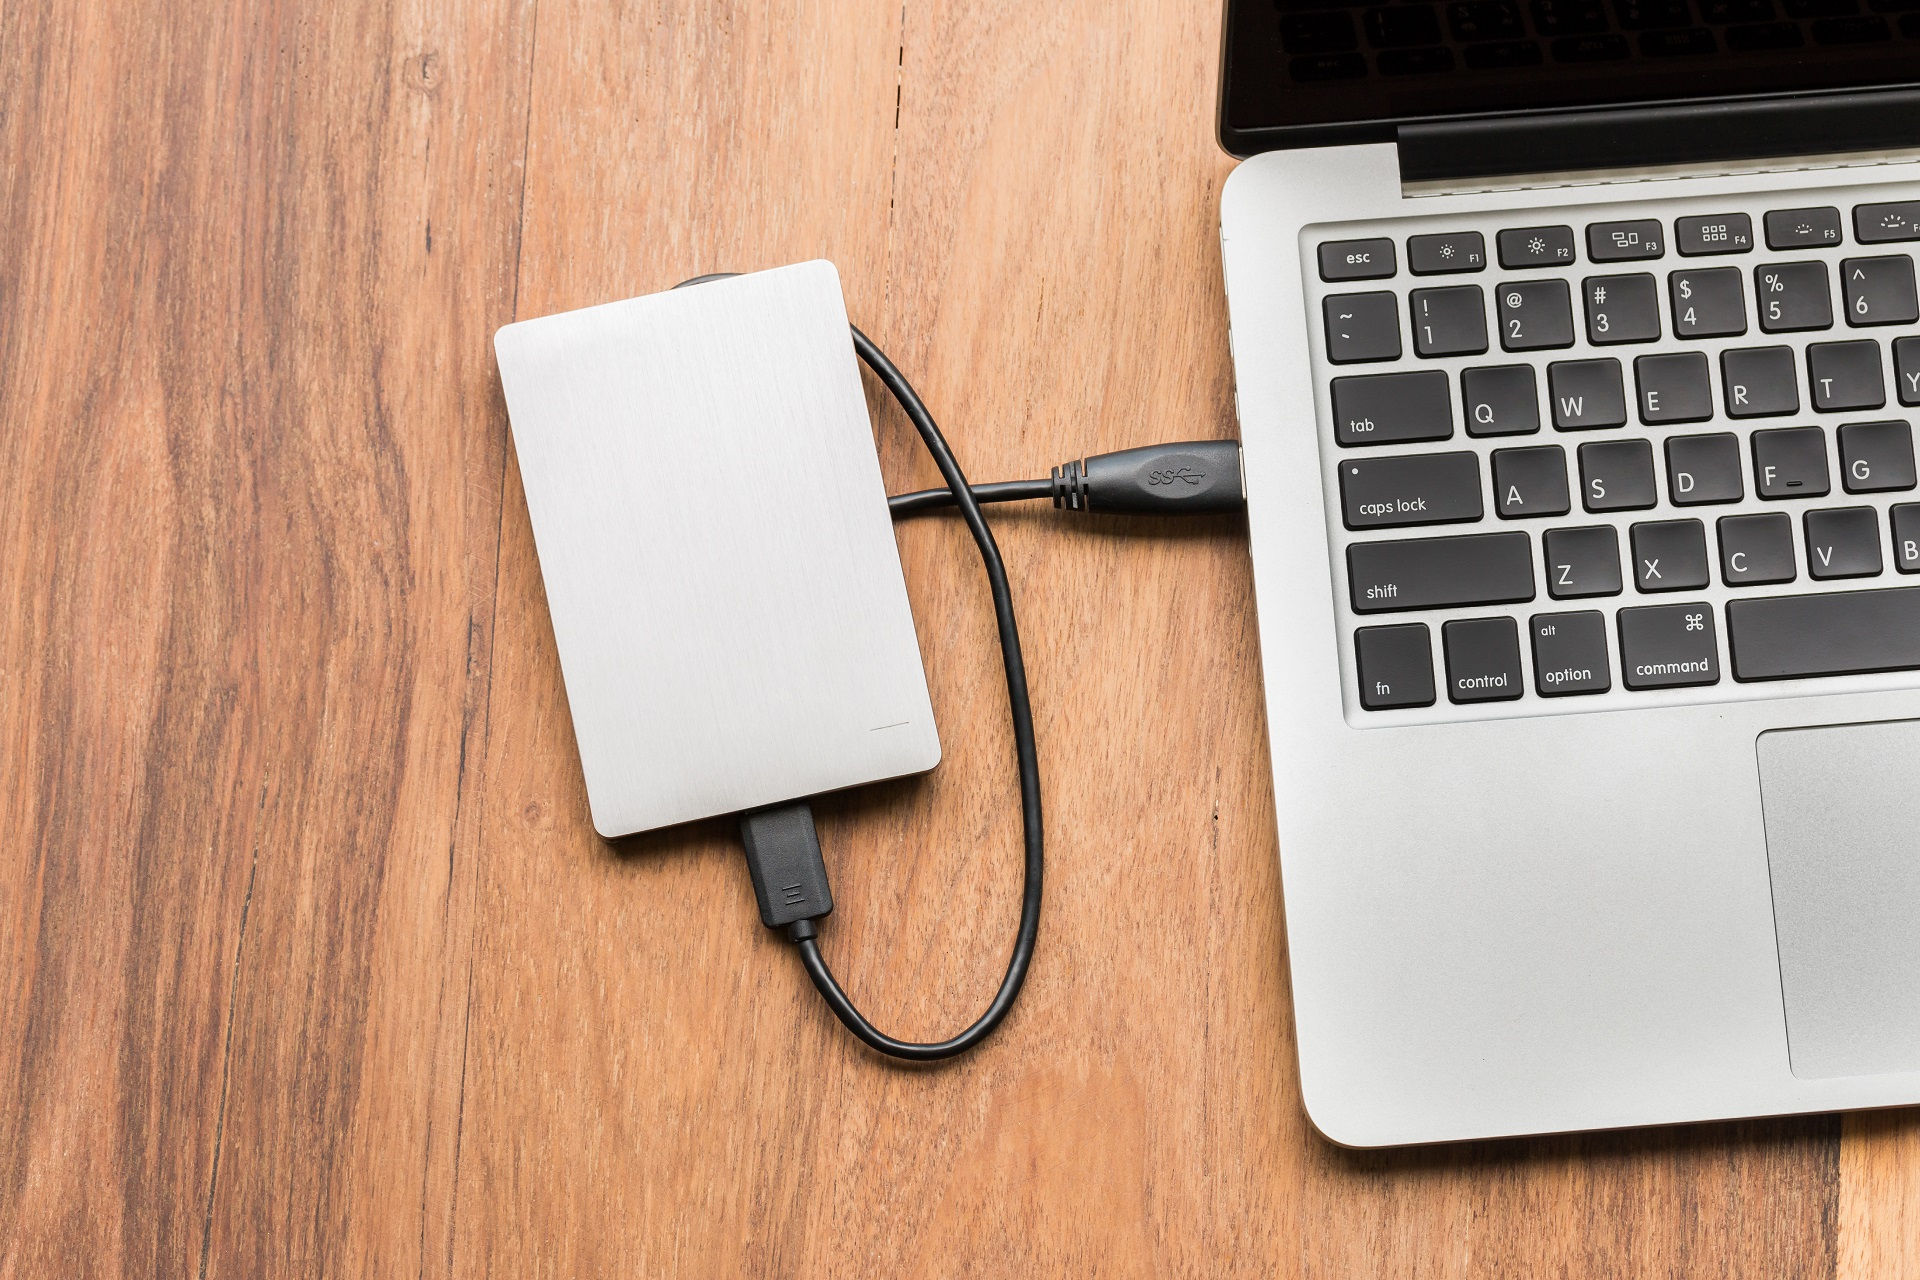 external drive for both mac and windows